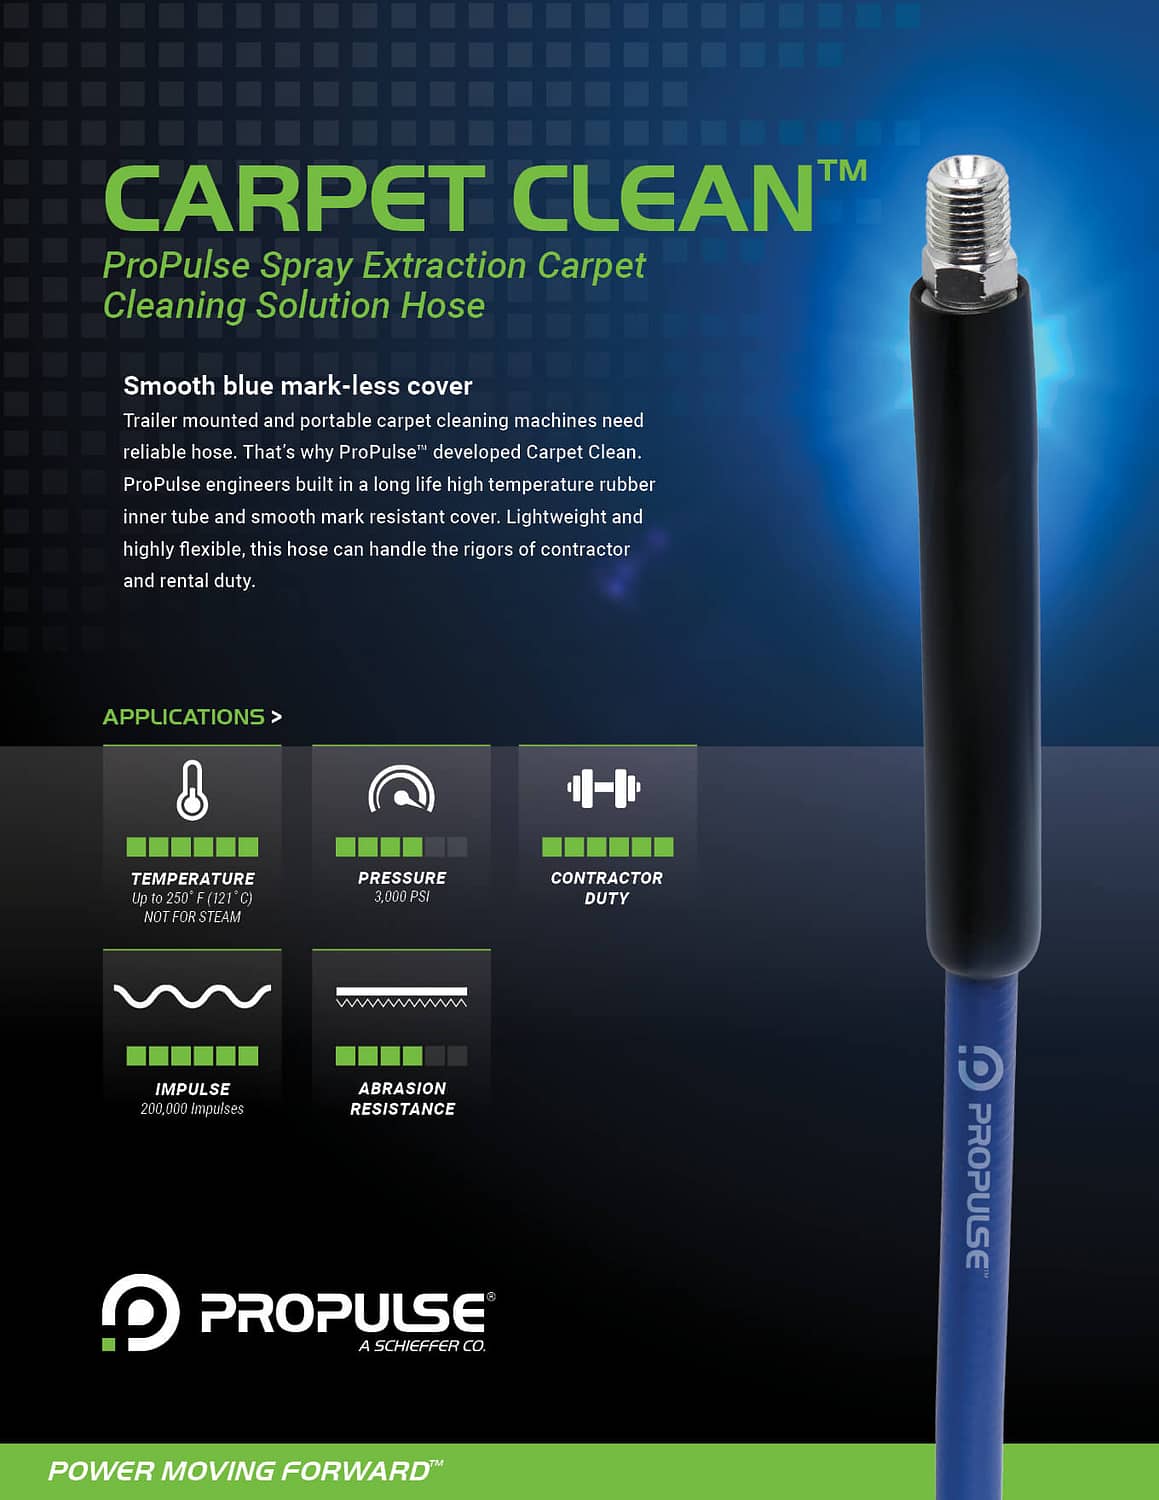 Spray Extraction Carpet Cleaning Hose